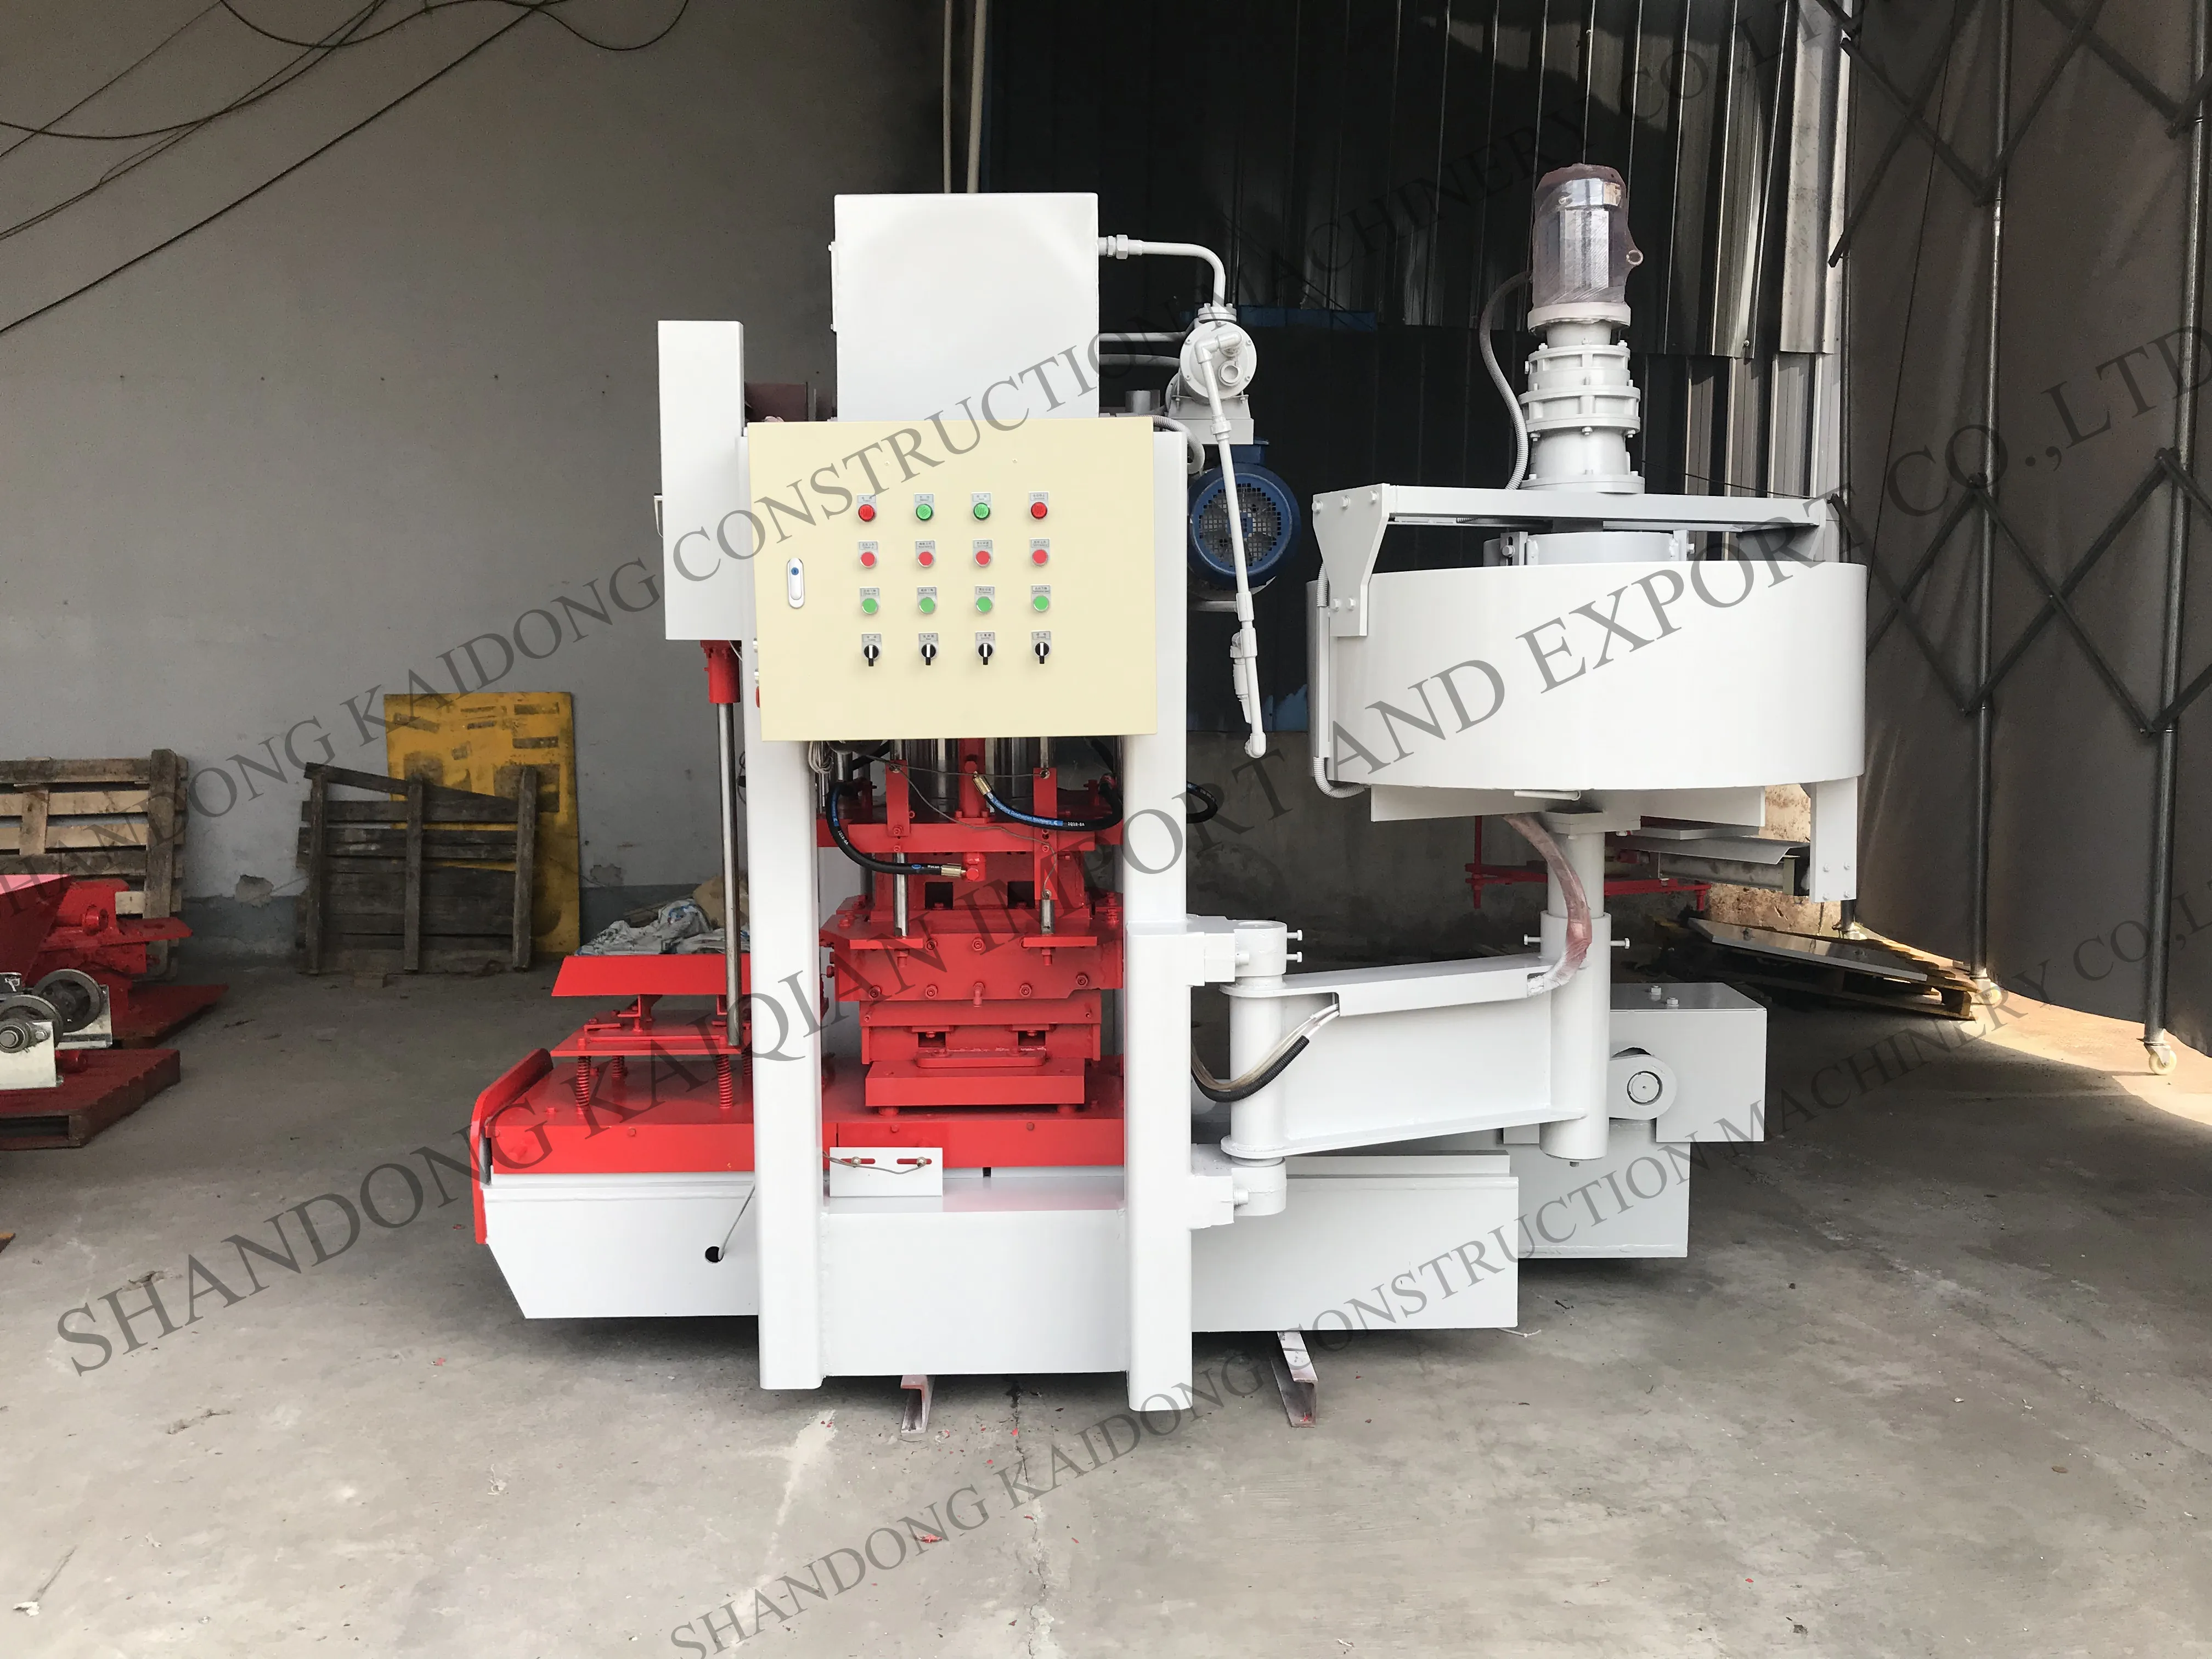 Hot selling Roof tile making machine sold from China factory